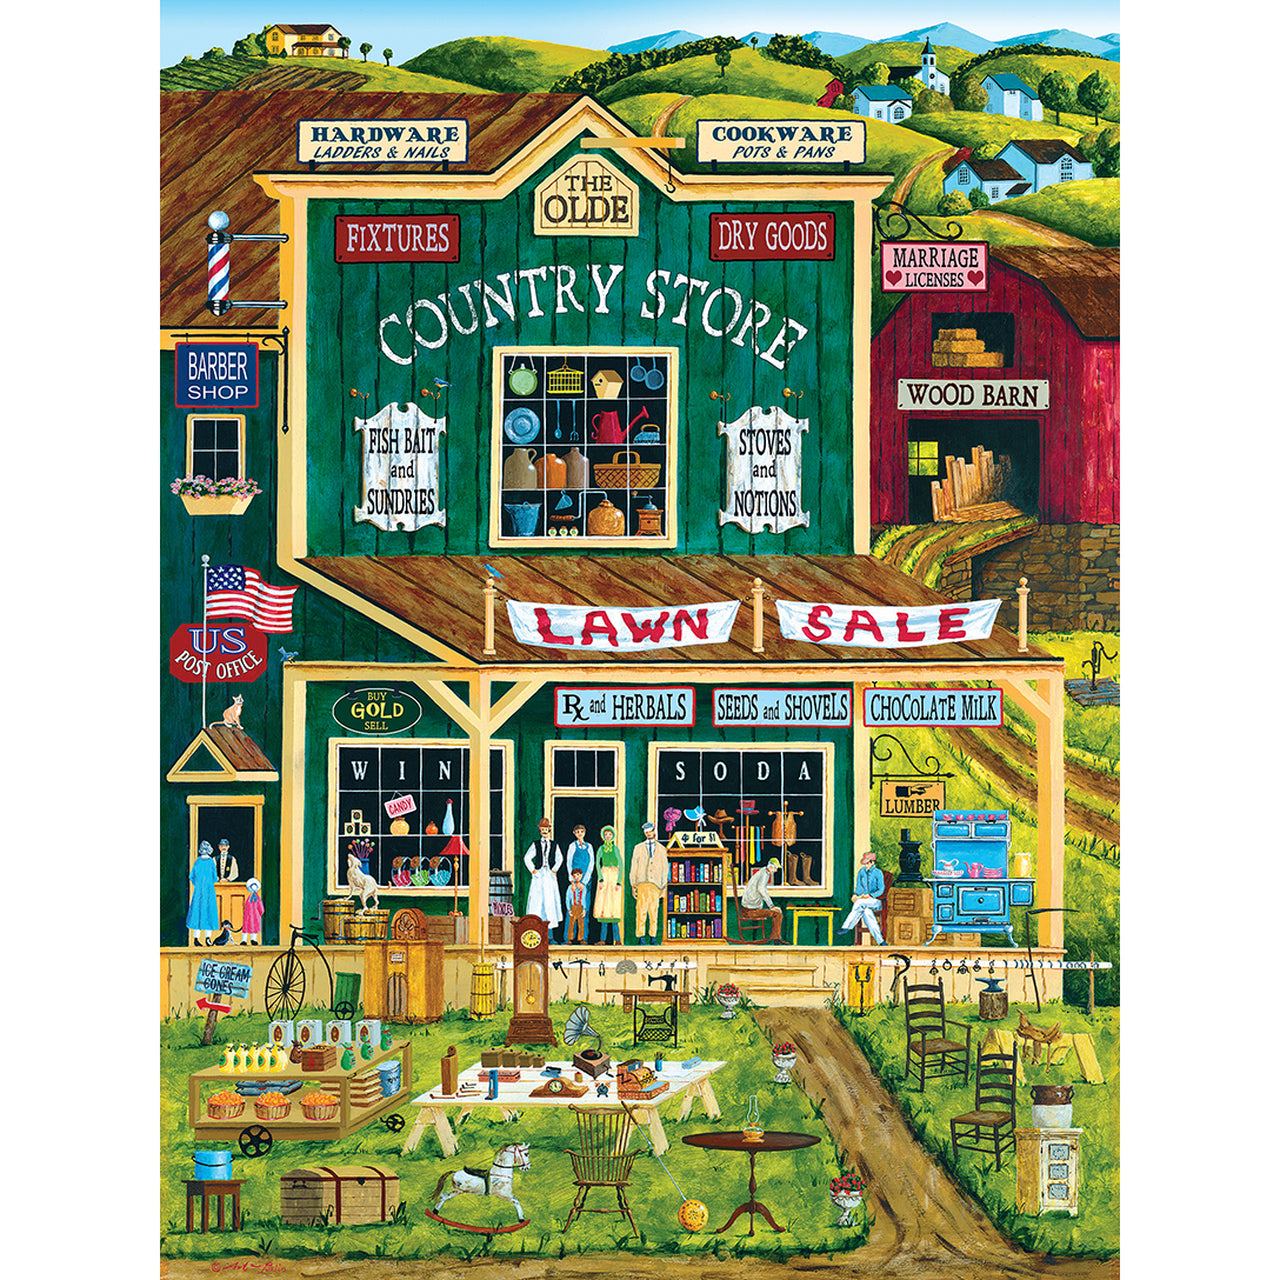 Town & Country The Old Country Store - Large 300 Piece EZGrip Jigsaw Puzzle by Masterpieces